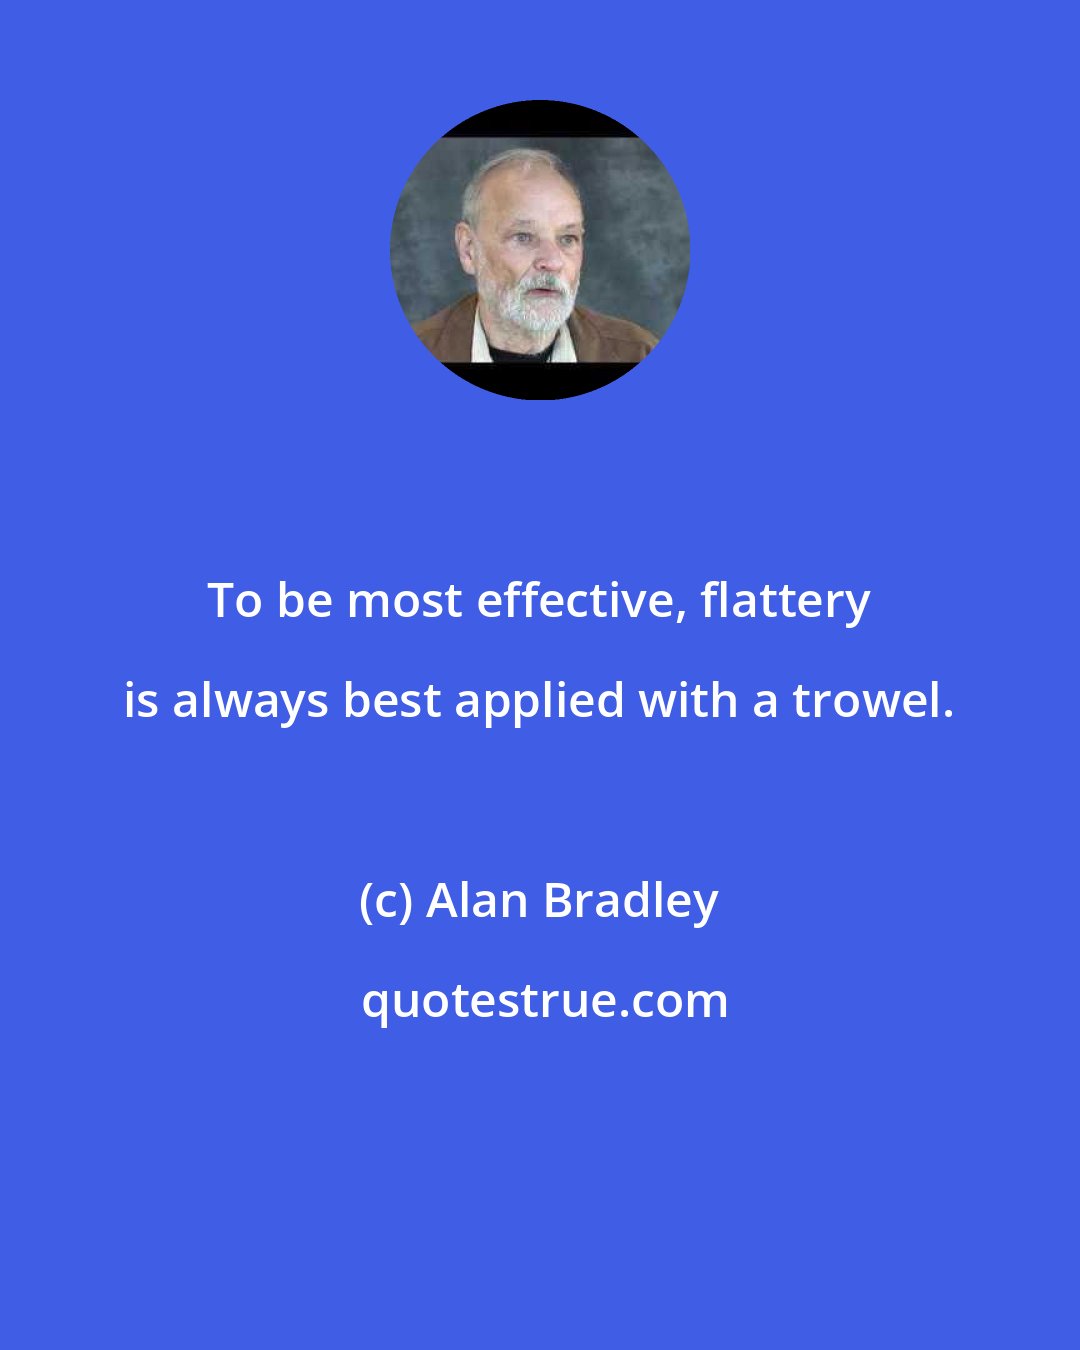 Alan Bradley: To be most effective, flattery is always best applied with a trowel.